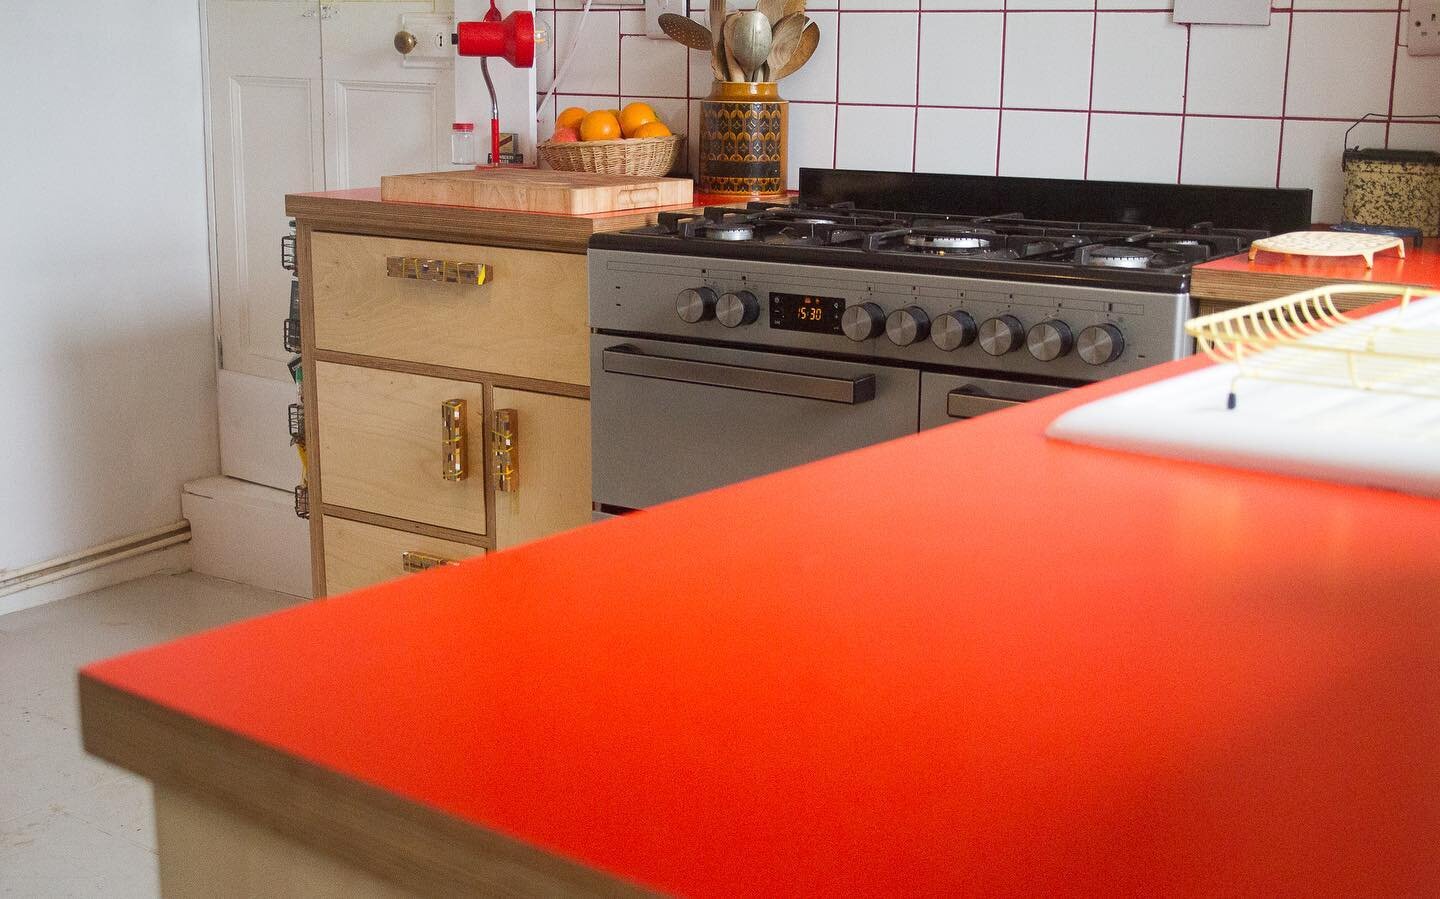 As promised, a full post on a kitchen we finished about a year ago. Super bright, 36mm birch ply worktop with Formica top. Tetris style cupboards and wall units. Modern Marquetry handles. 

#formicaworktop #modernmarquetry #bespokekitchen #inlaidhand